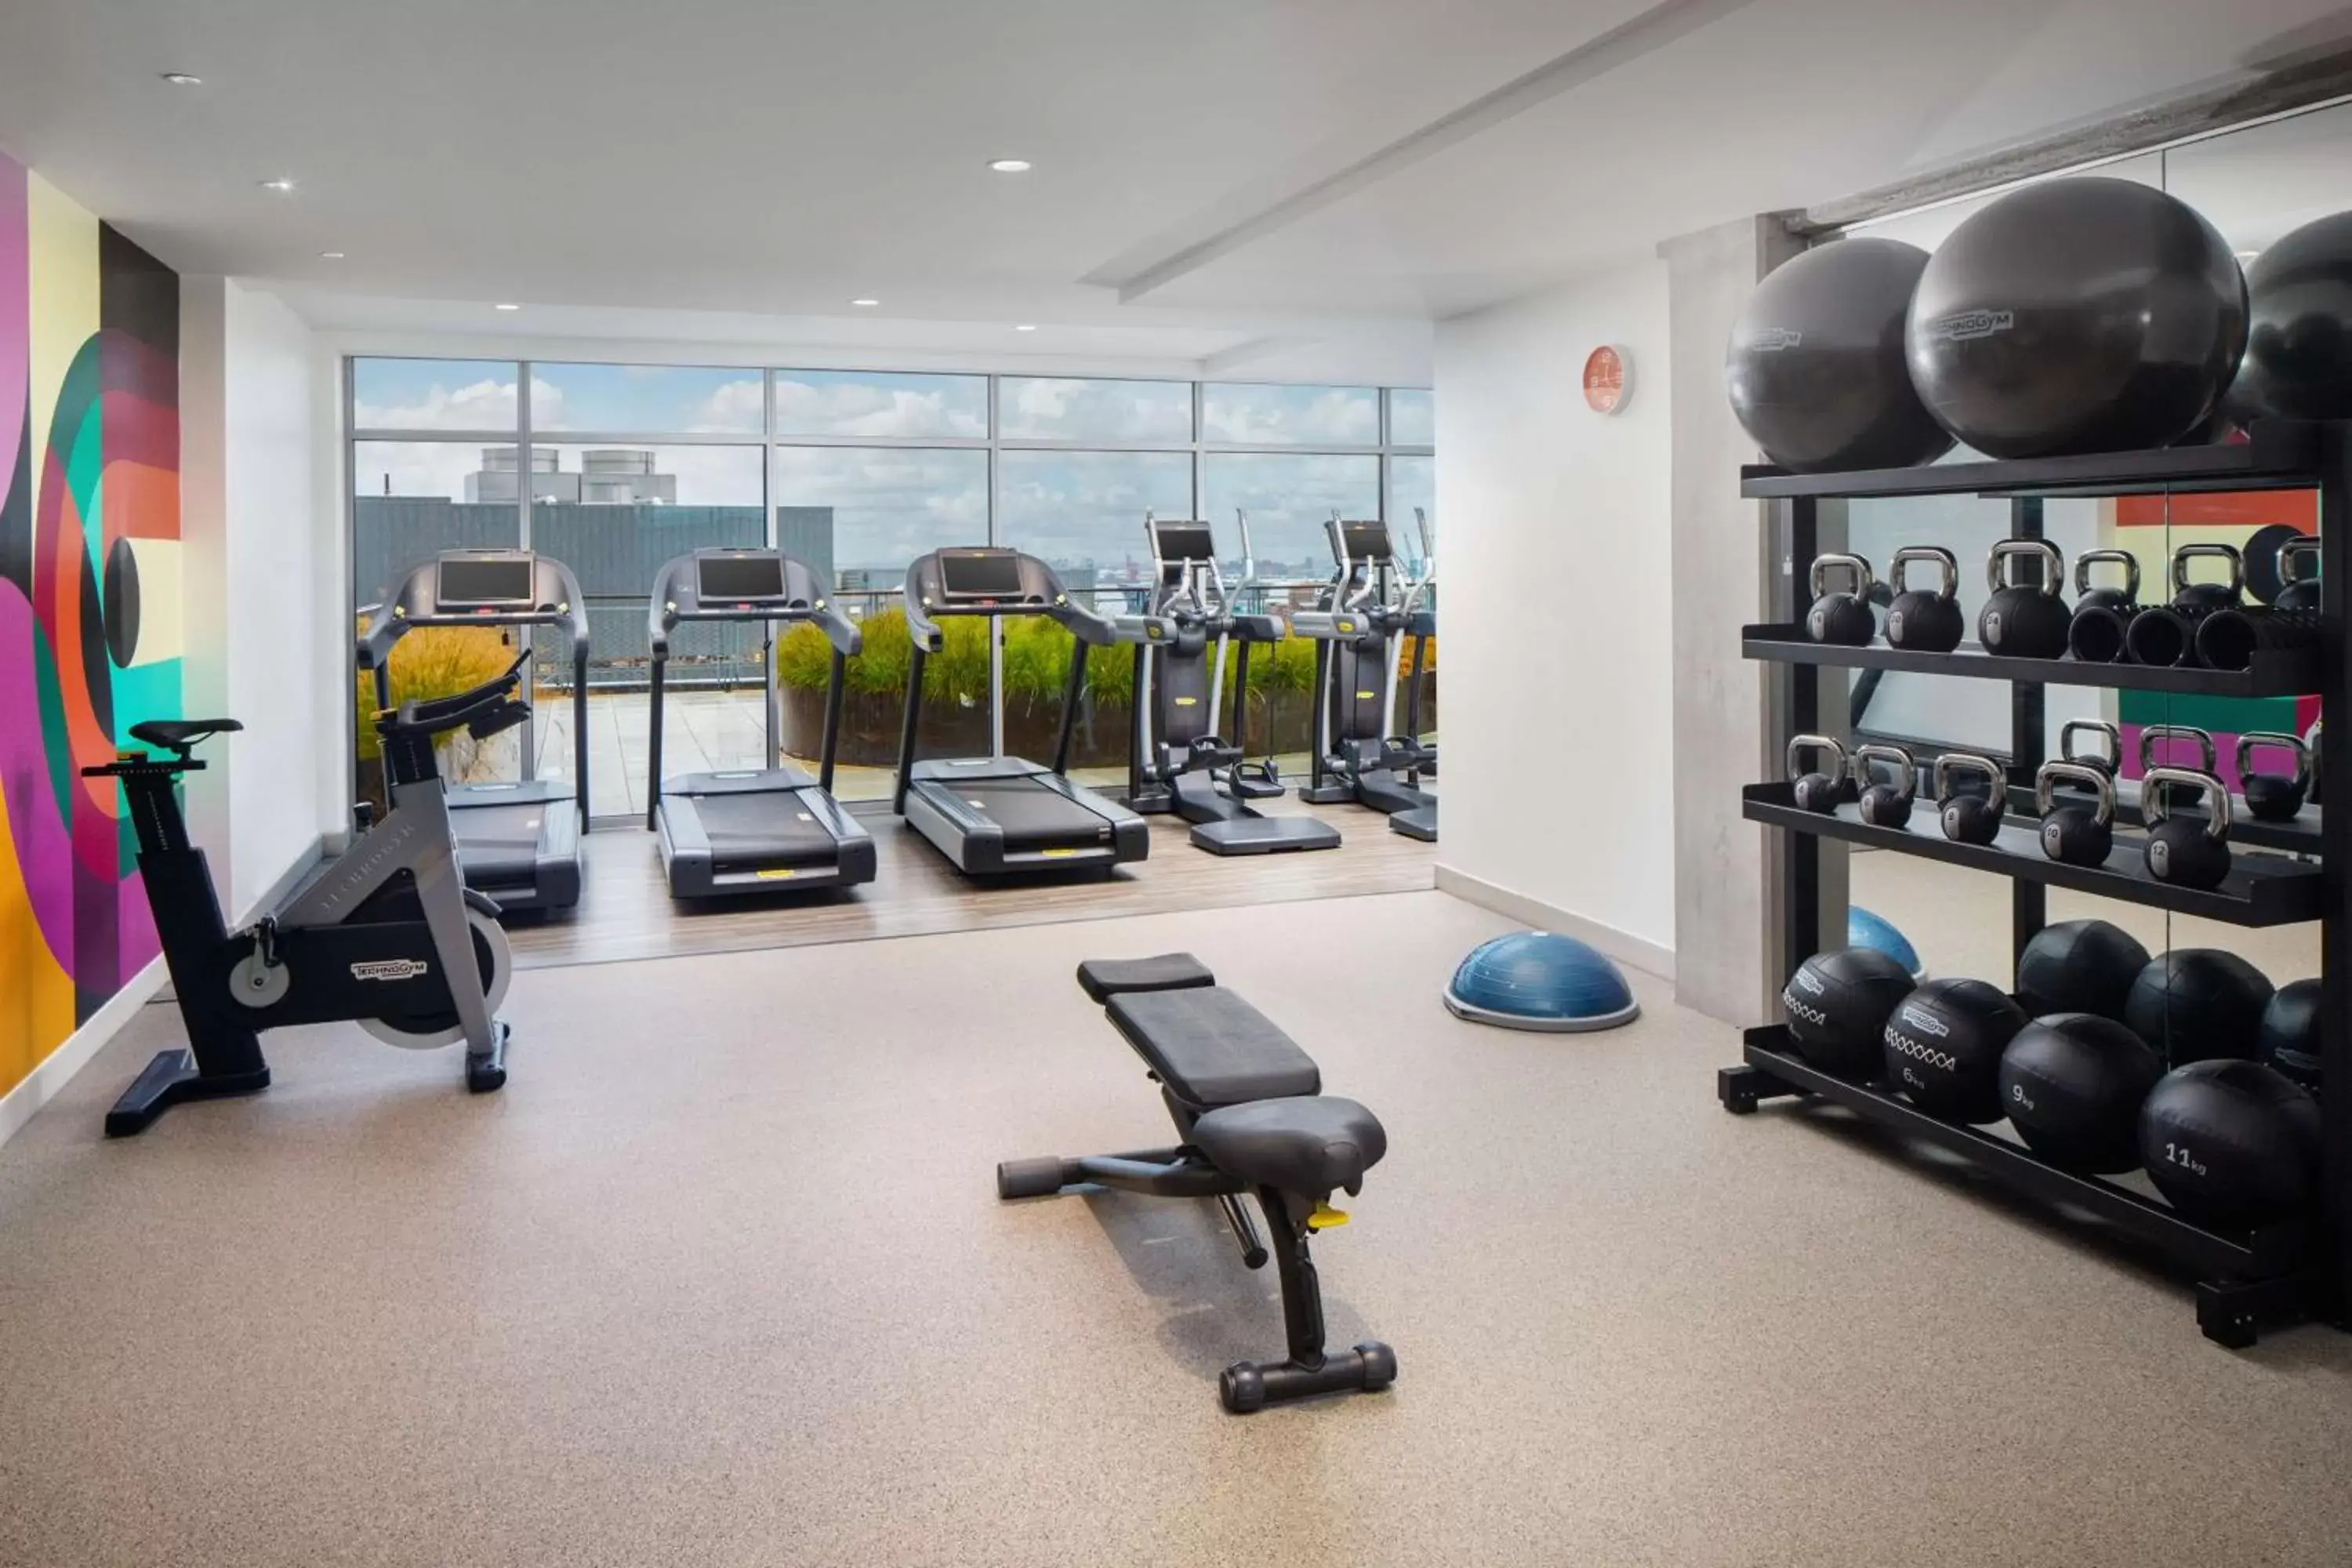 Fitness centre/facilities, Fitness Center/Facilities in Canopy By Hilton Baltimore Harbor Point - Newly Built